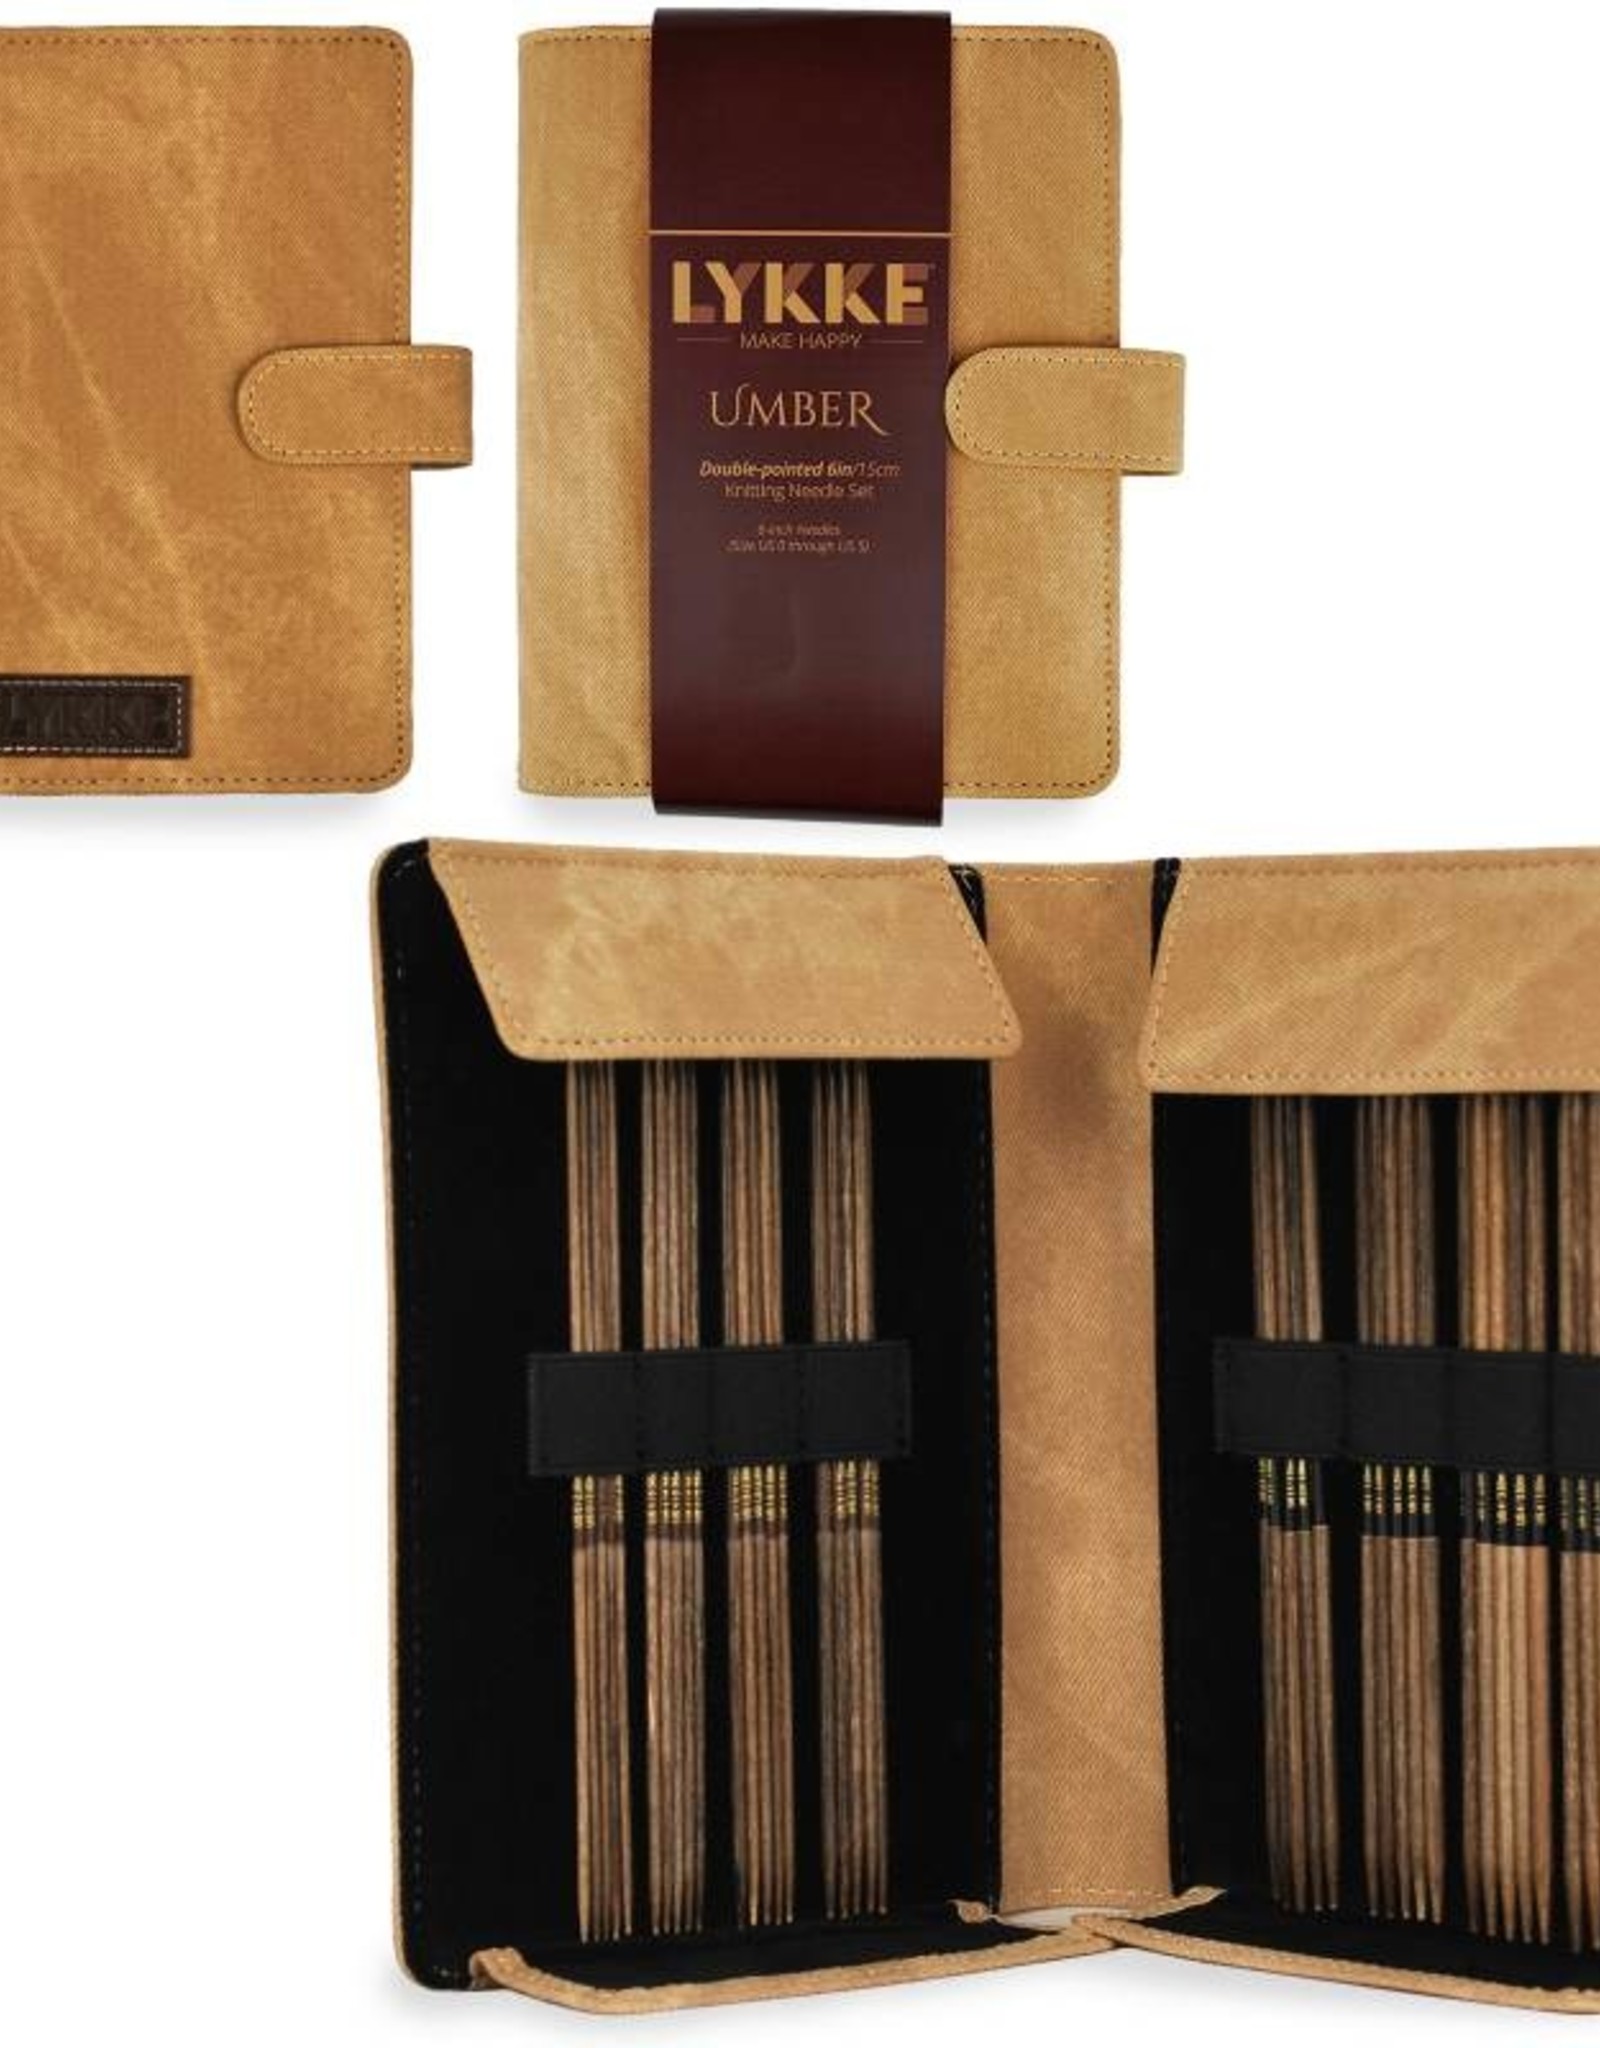 Lykke Driftwood 6" Double Pointed Small Set - Umber Pouch